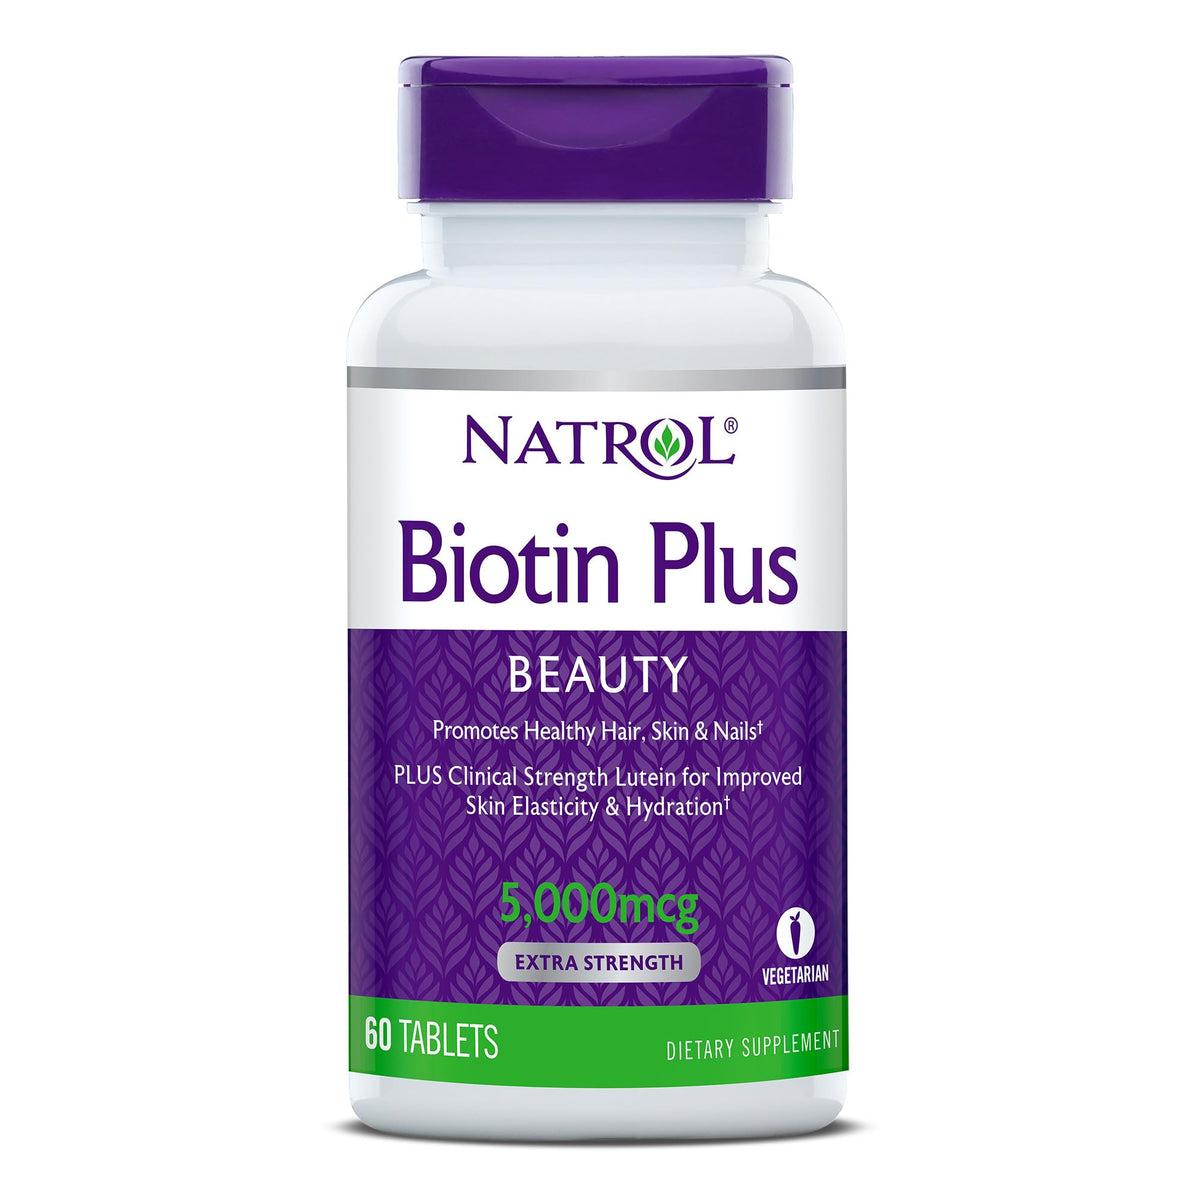 Natrol Biotin Beauty Plus Lutein Tablets, Supplement Promotes Healthy Hair, Skin and Nails, Improves Skin Elasticity and Hydration, Extra Strength 5,000 mcg, 60 Count